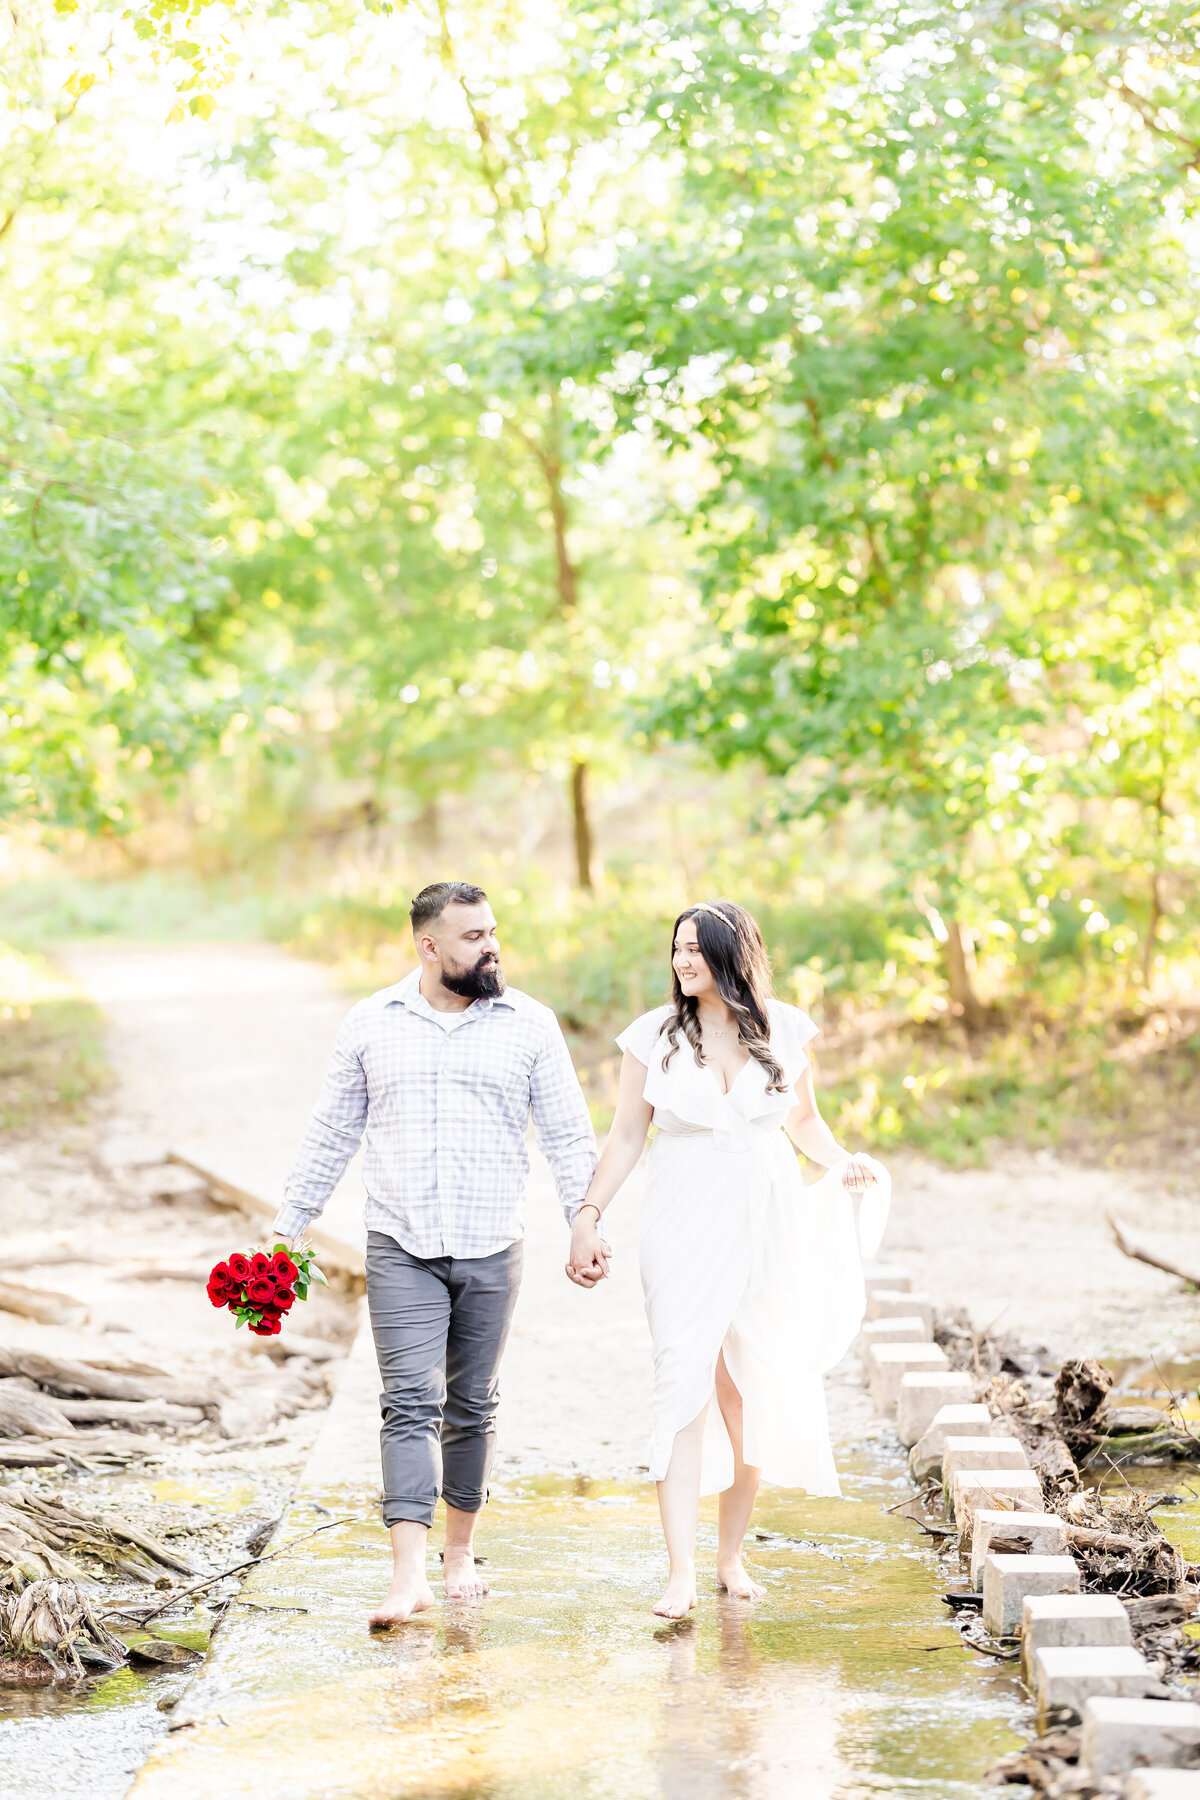 Melissa+Ronnie_Engagement-Session_Hannah-Charis-Photography-93